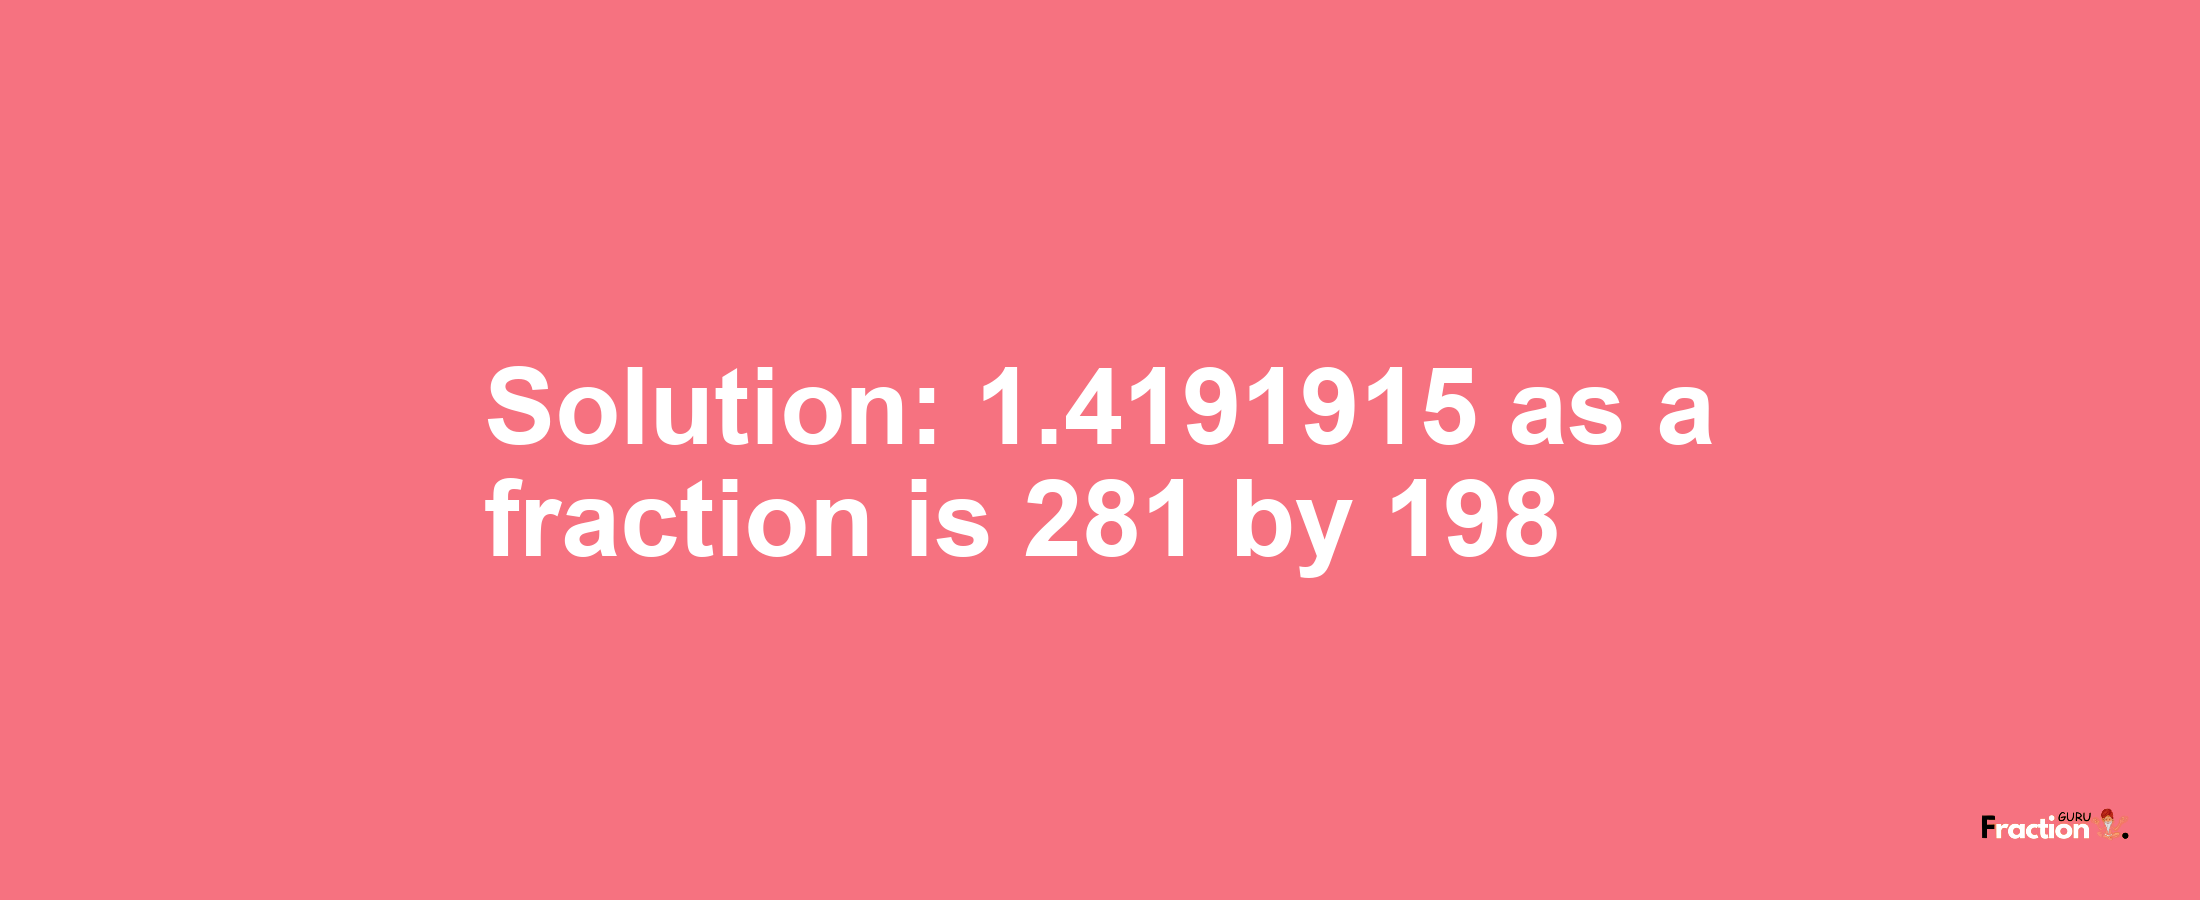 Solution:1.4191915 as a fraction is 281/198